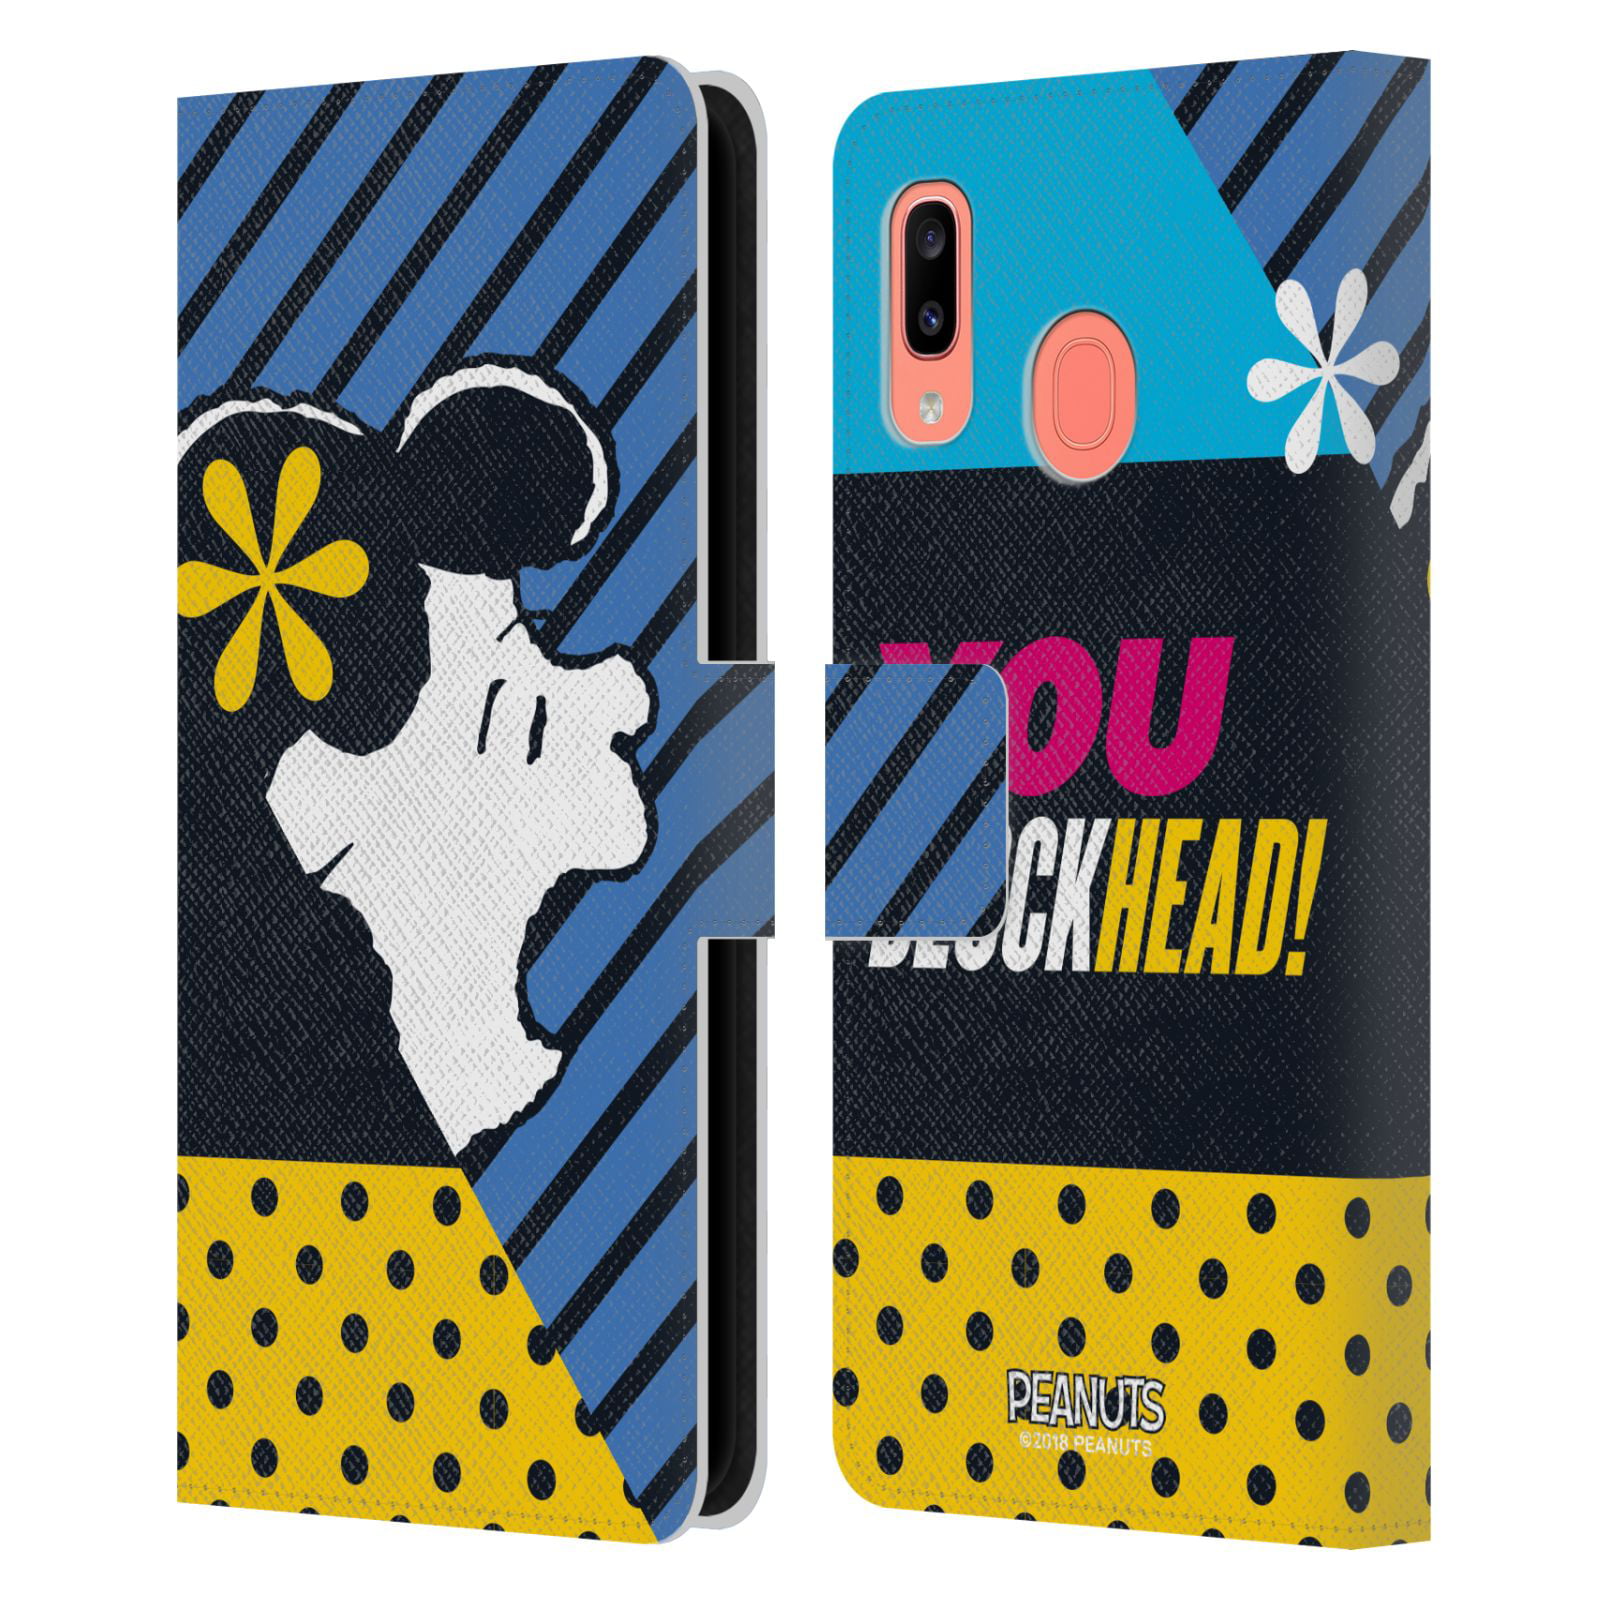 Head Case Designs Officially Licensed And Lucy van Pelt Leather Book Wallet Case Cover Compatible with Samsung Galaxy A20 / A30 2019 Walmart.com - Walmart.com